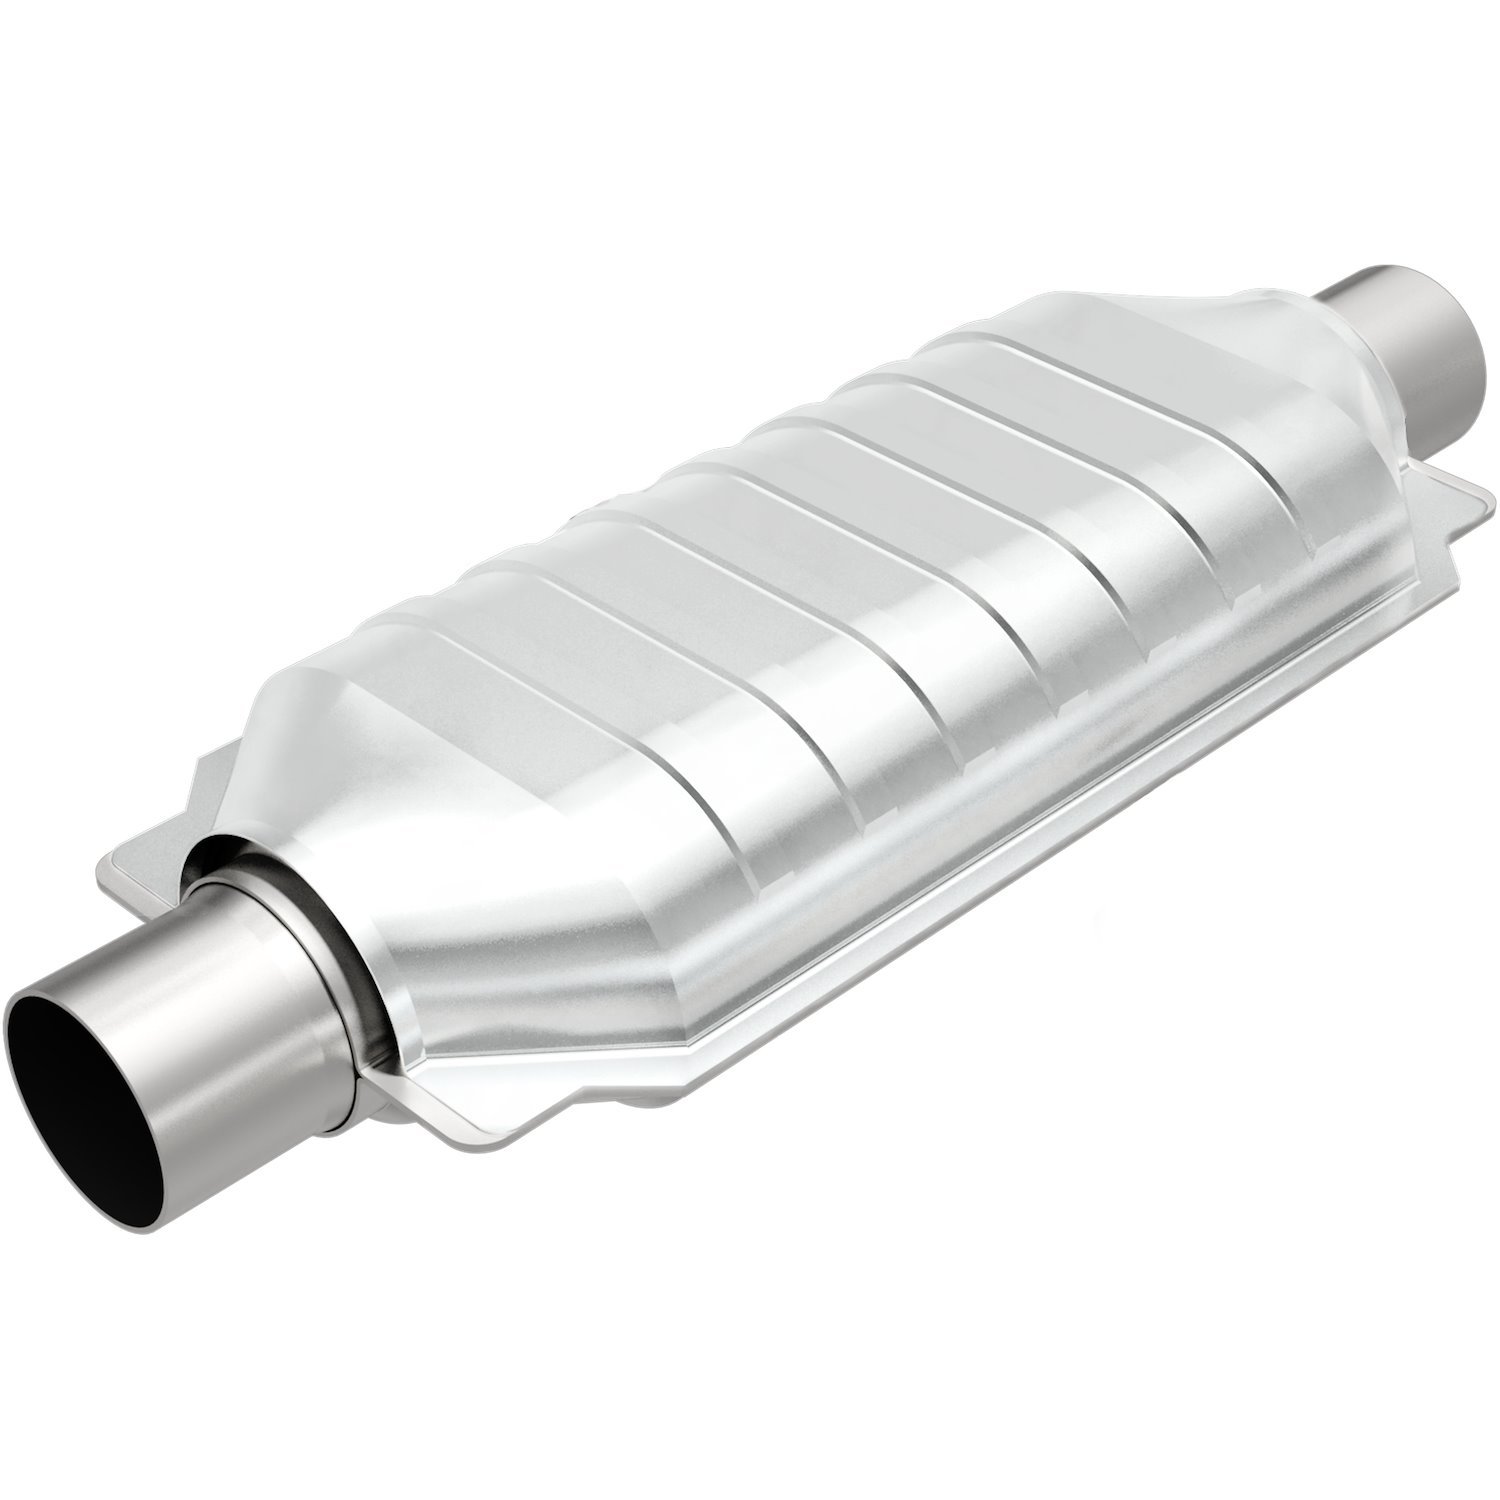 OBD-II 49-State Universal Catalytic Converter Body Shape: Oval,